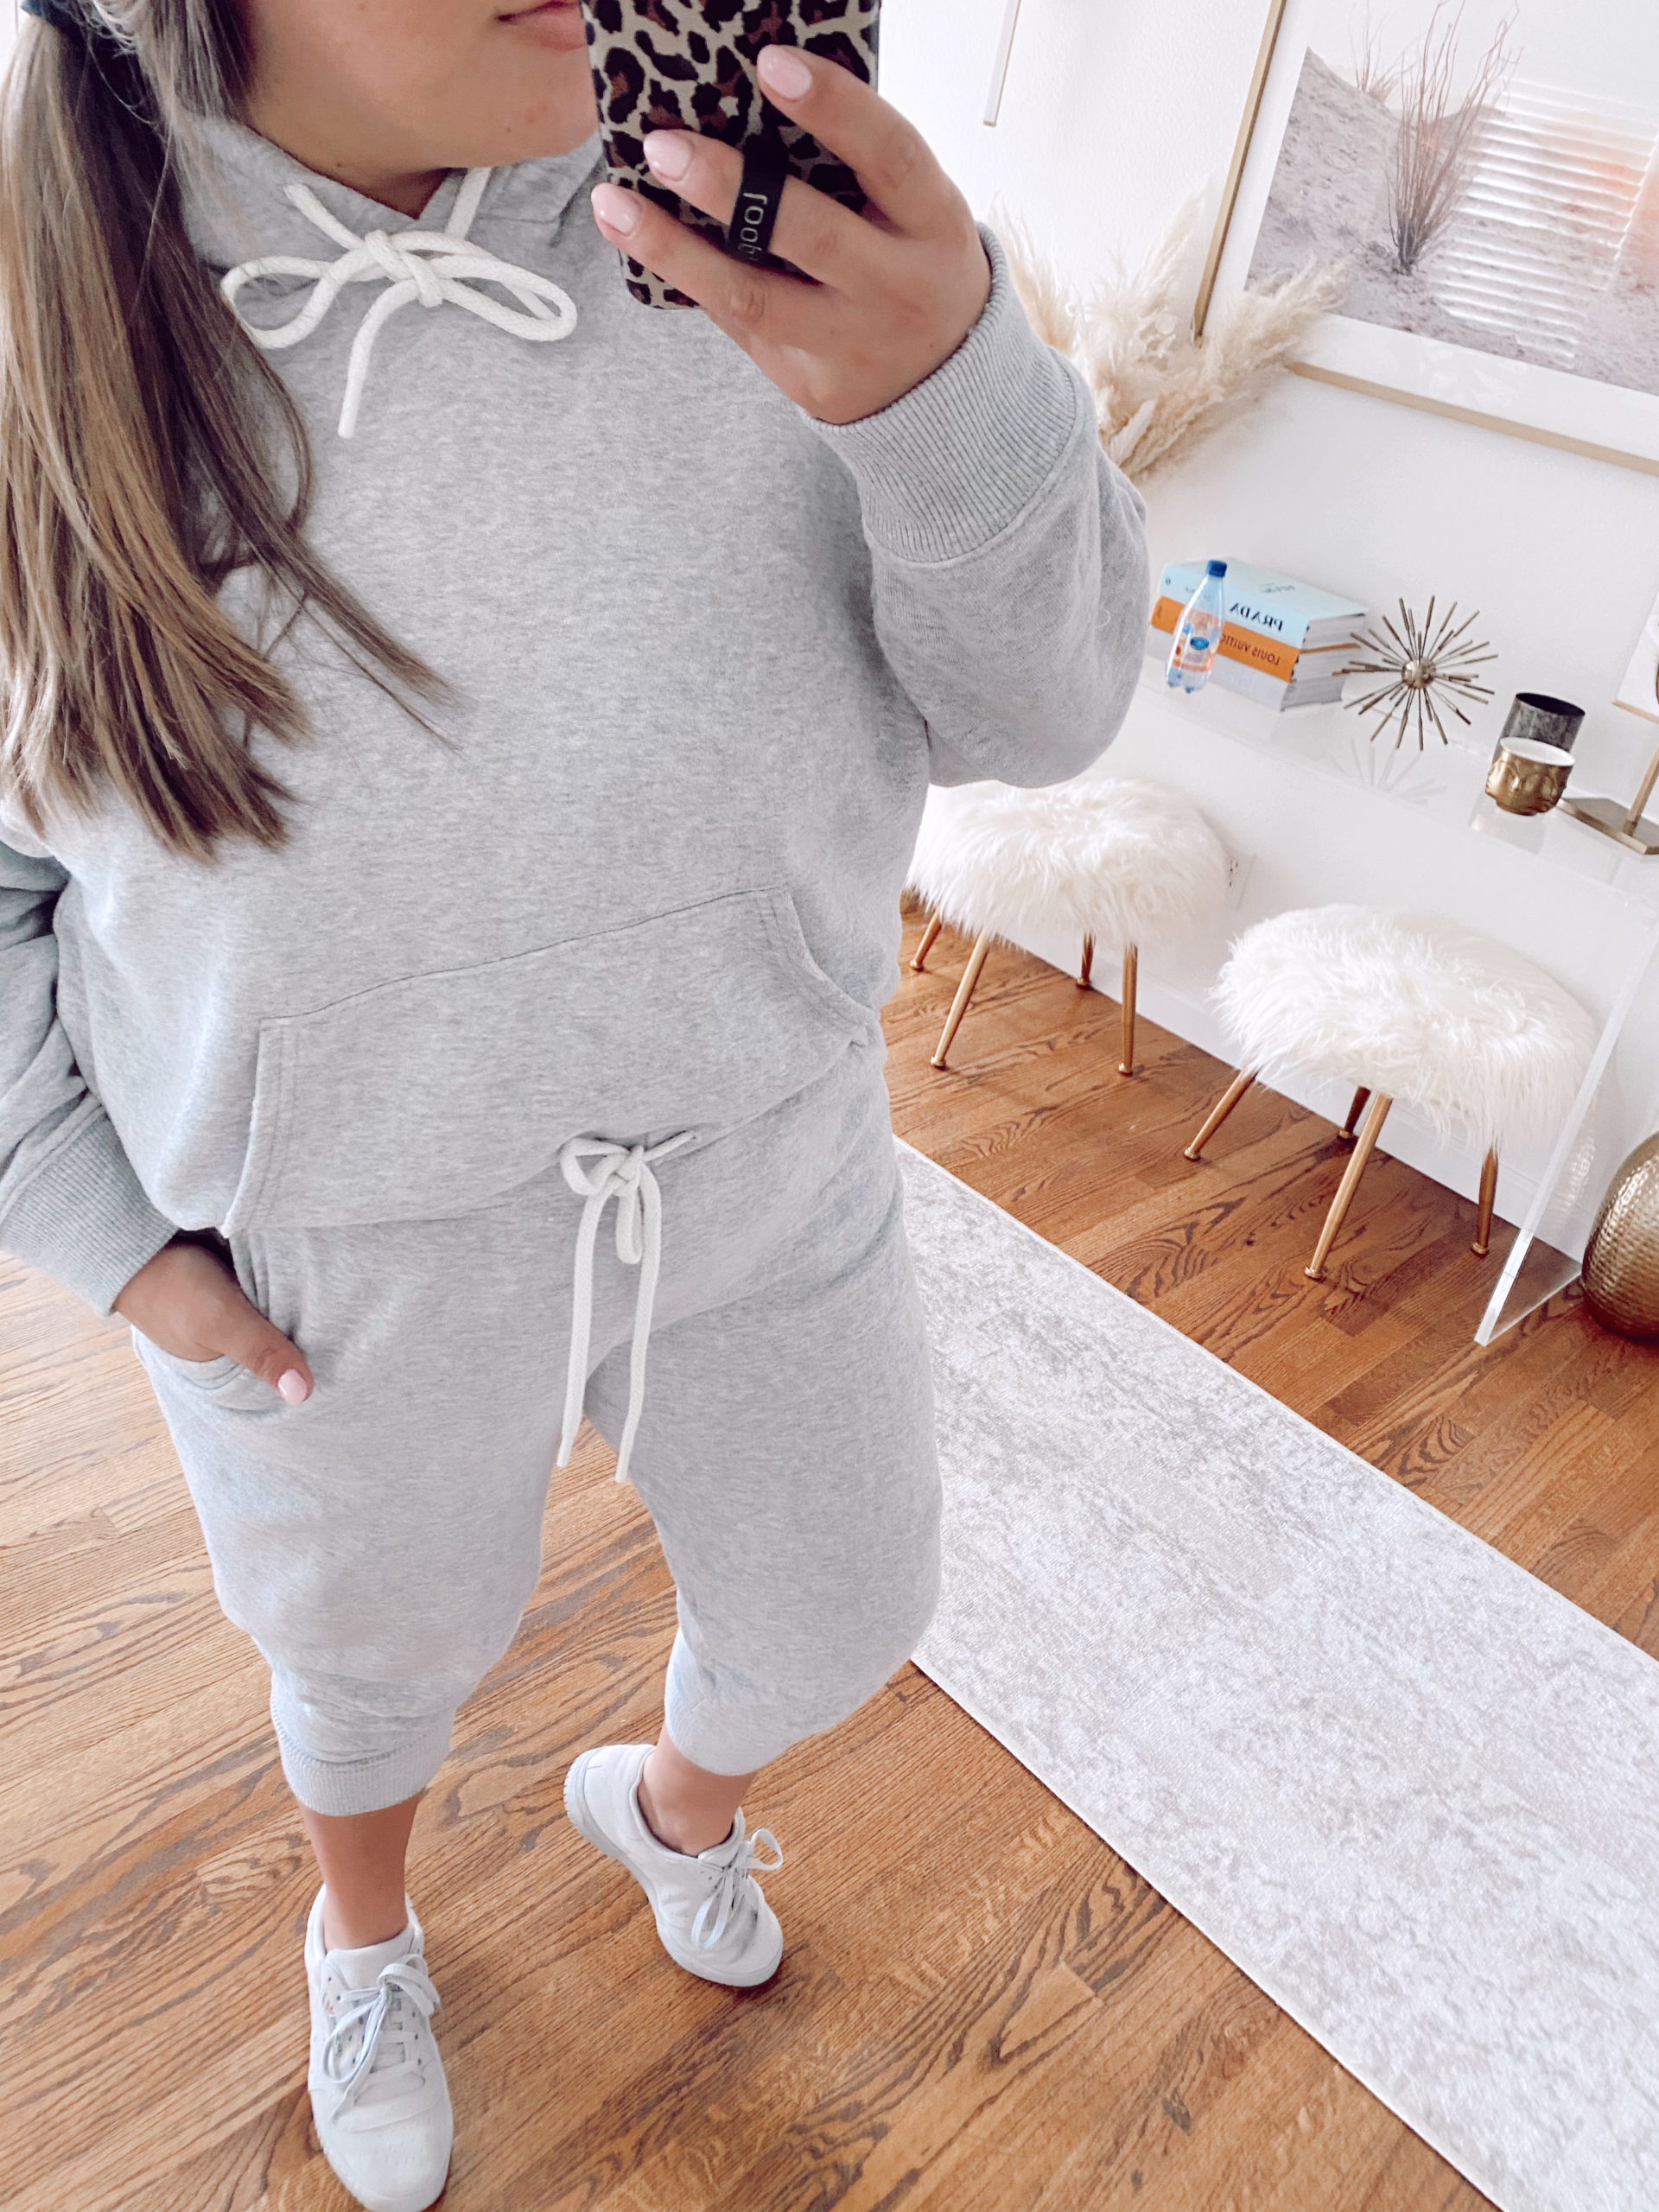 Reno blogger, Ashley Zeal, from Two Peas in a Prada shares her top picks from the Aerie Sale. Stock up on all the lounge wear! 